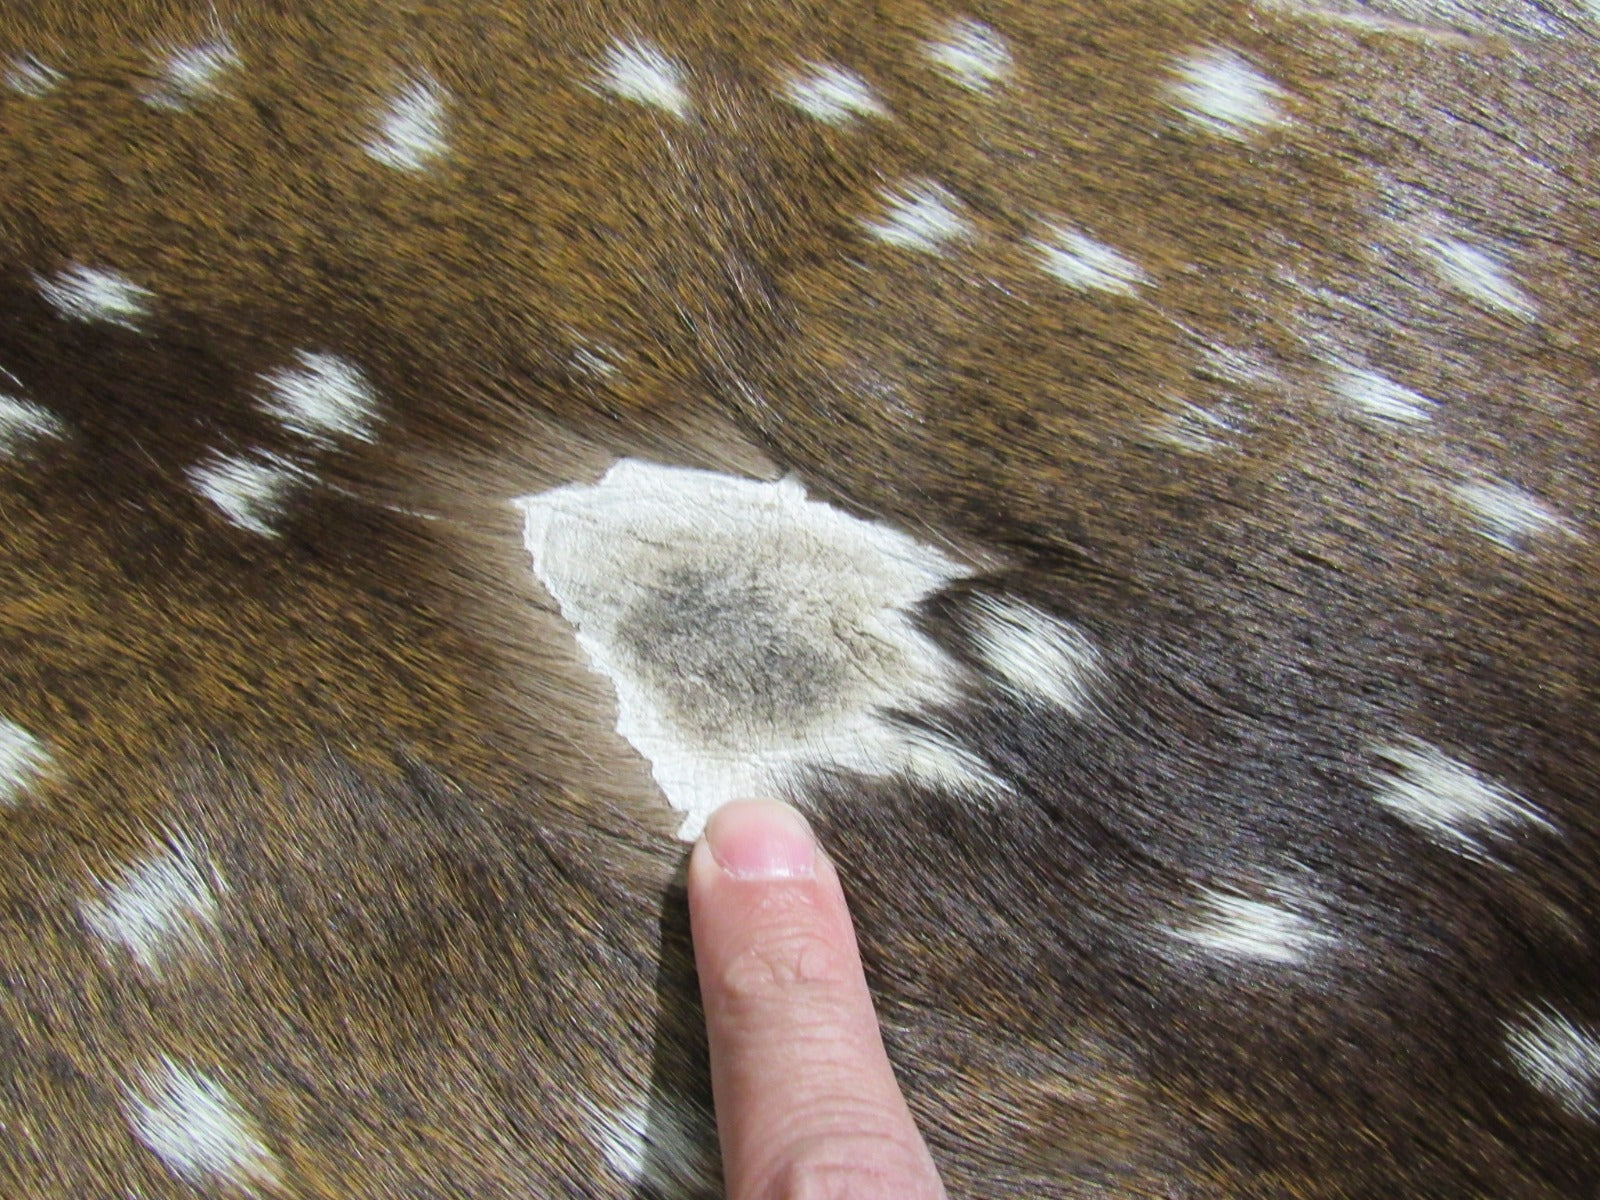 2nd Grade AXIS DEER SKIN (5 holes) Size: 42x38" Axis-707